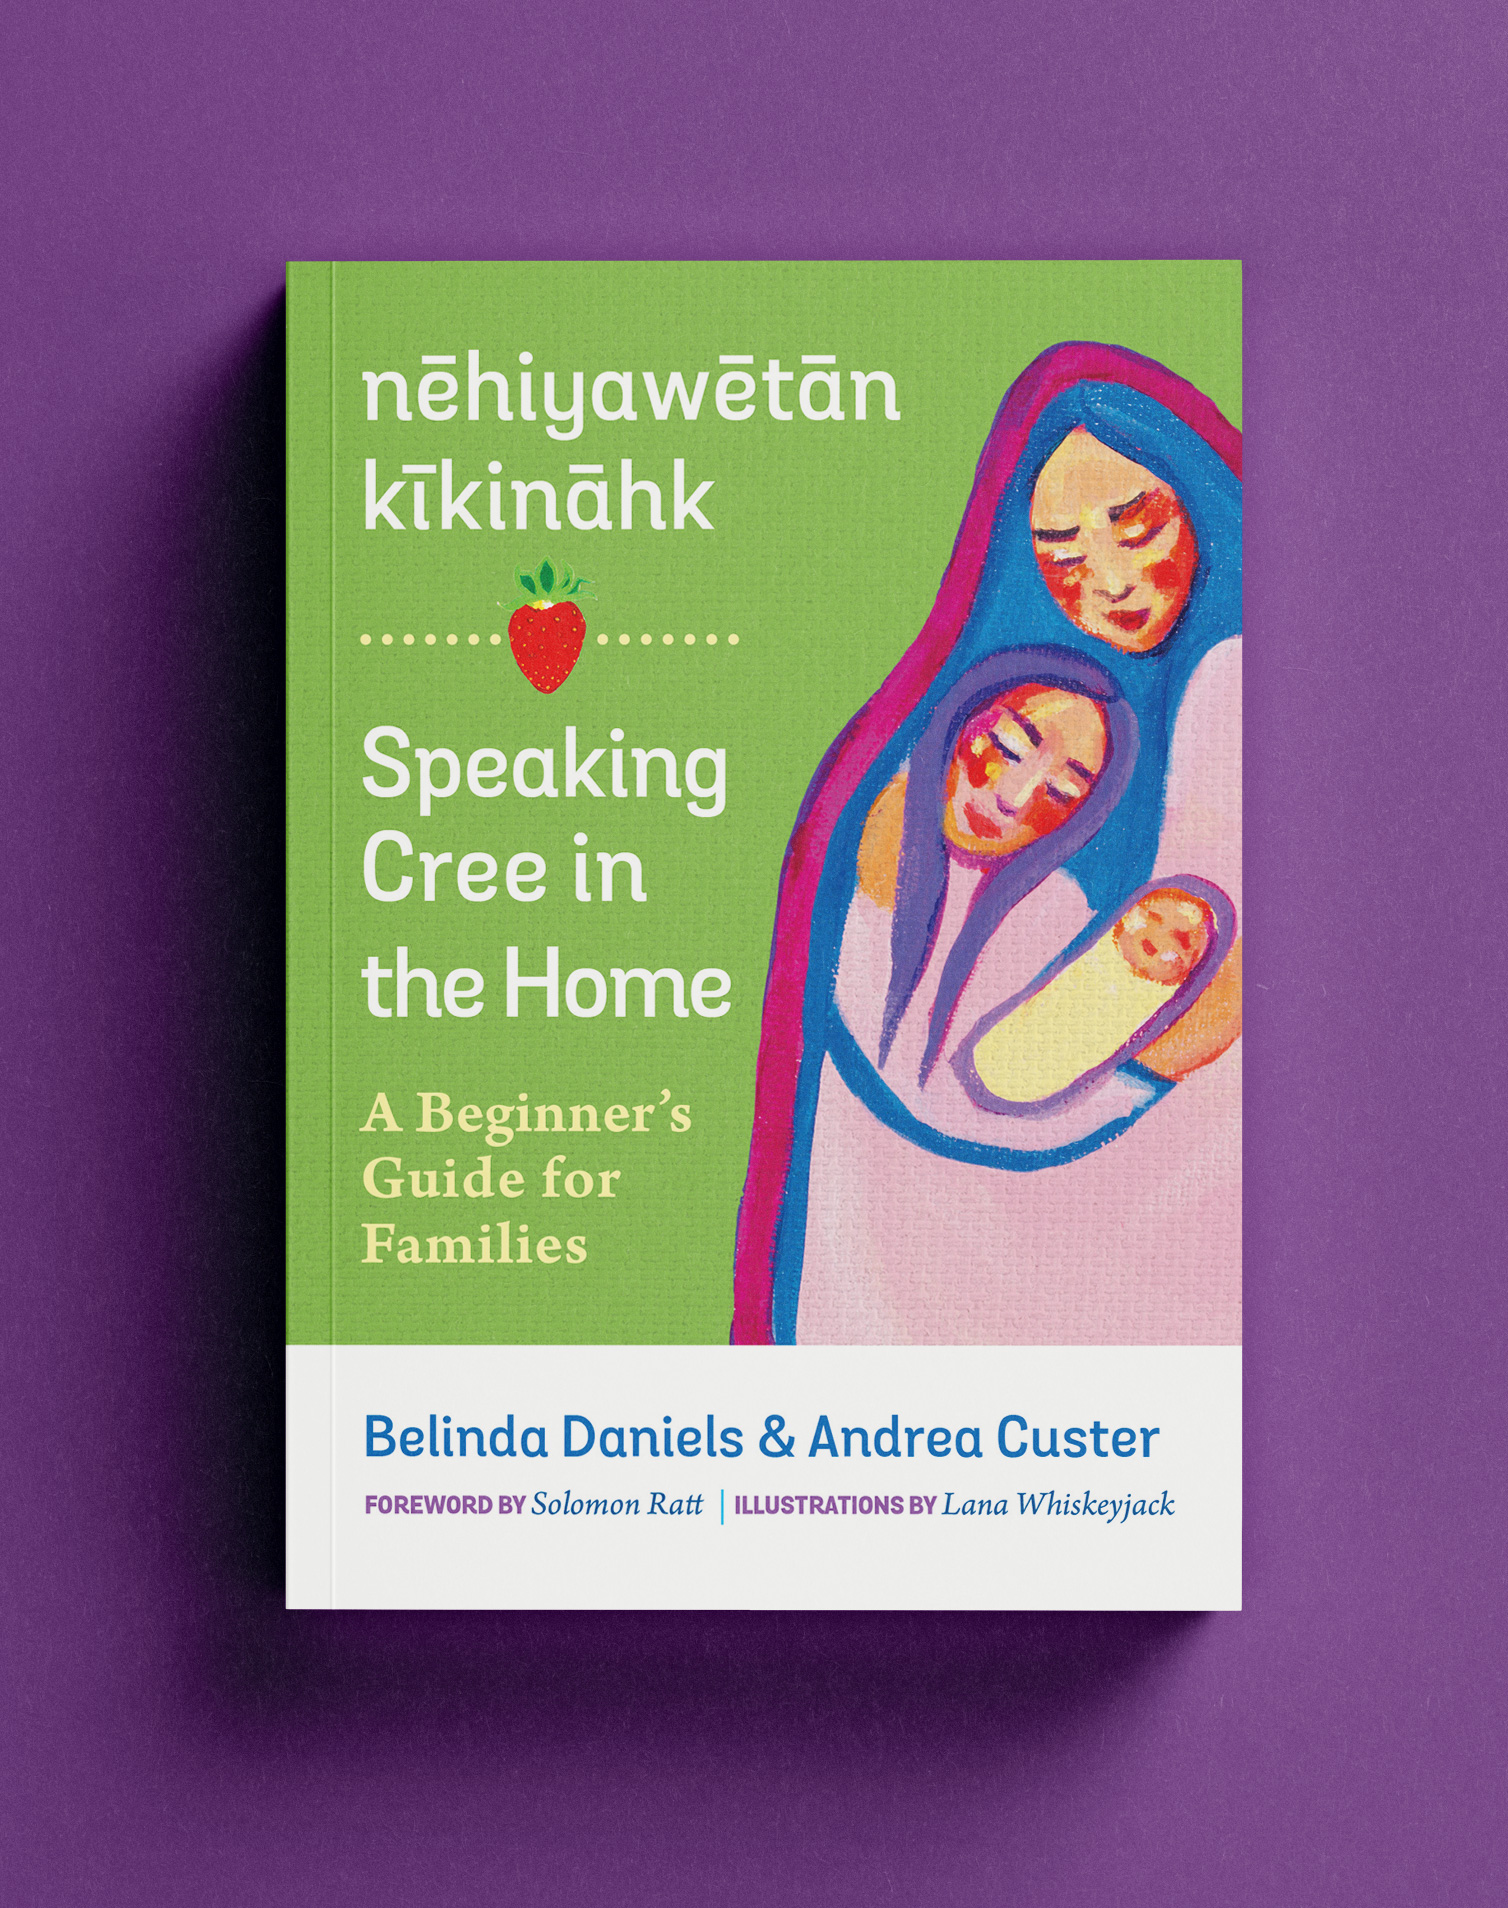 SPeaking-Cree-in-the-Home-Book-cover